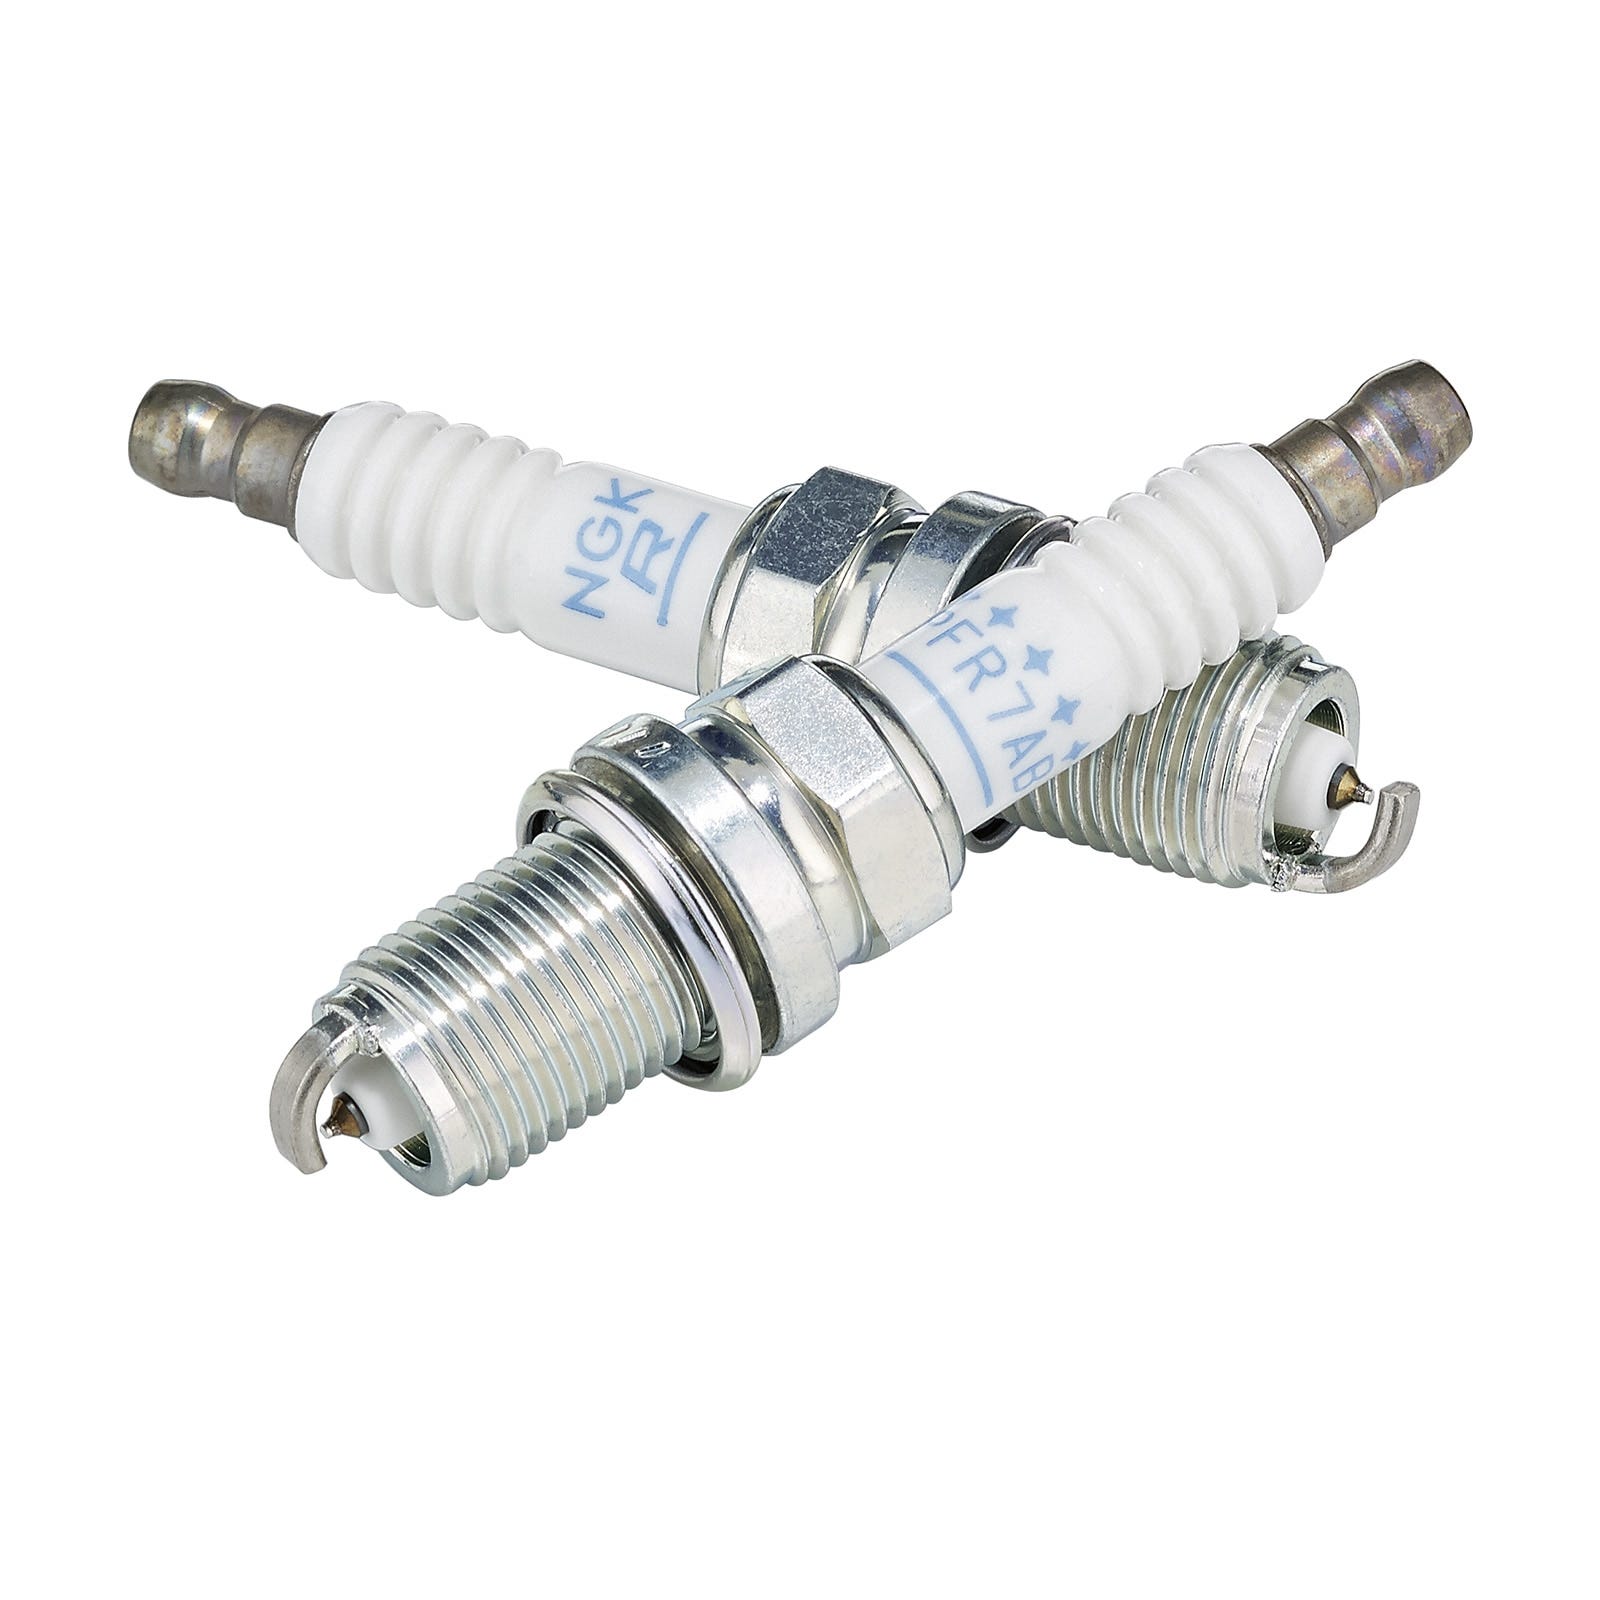 NGK Spark Plugs - 415130154 - The Parts Lodge